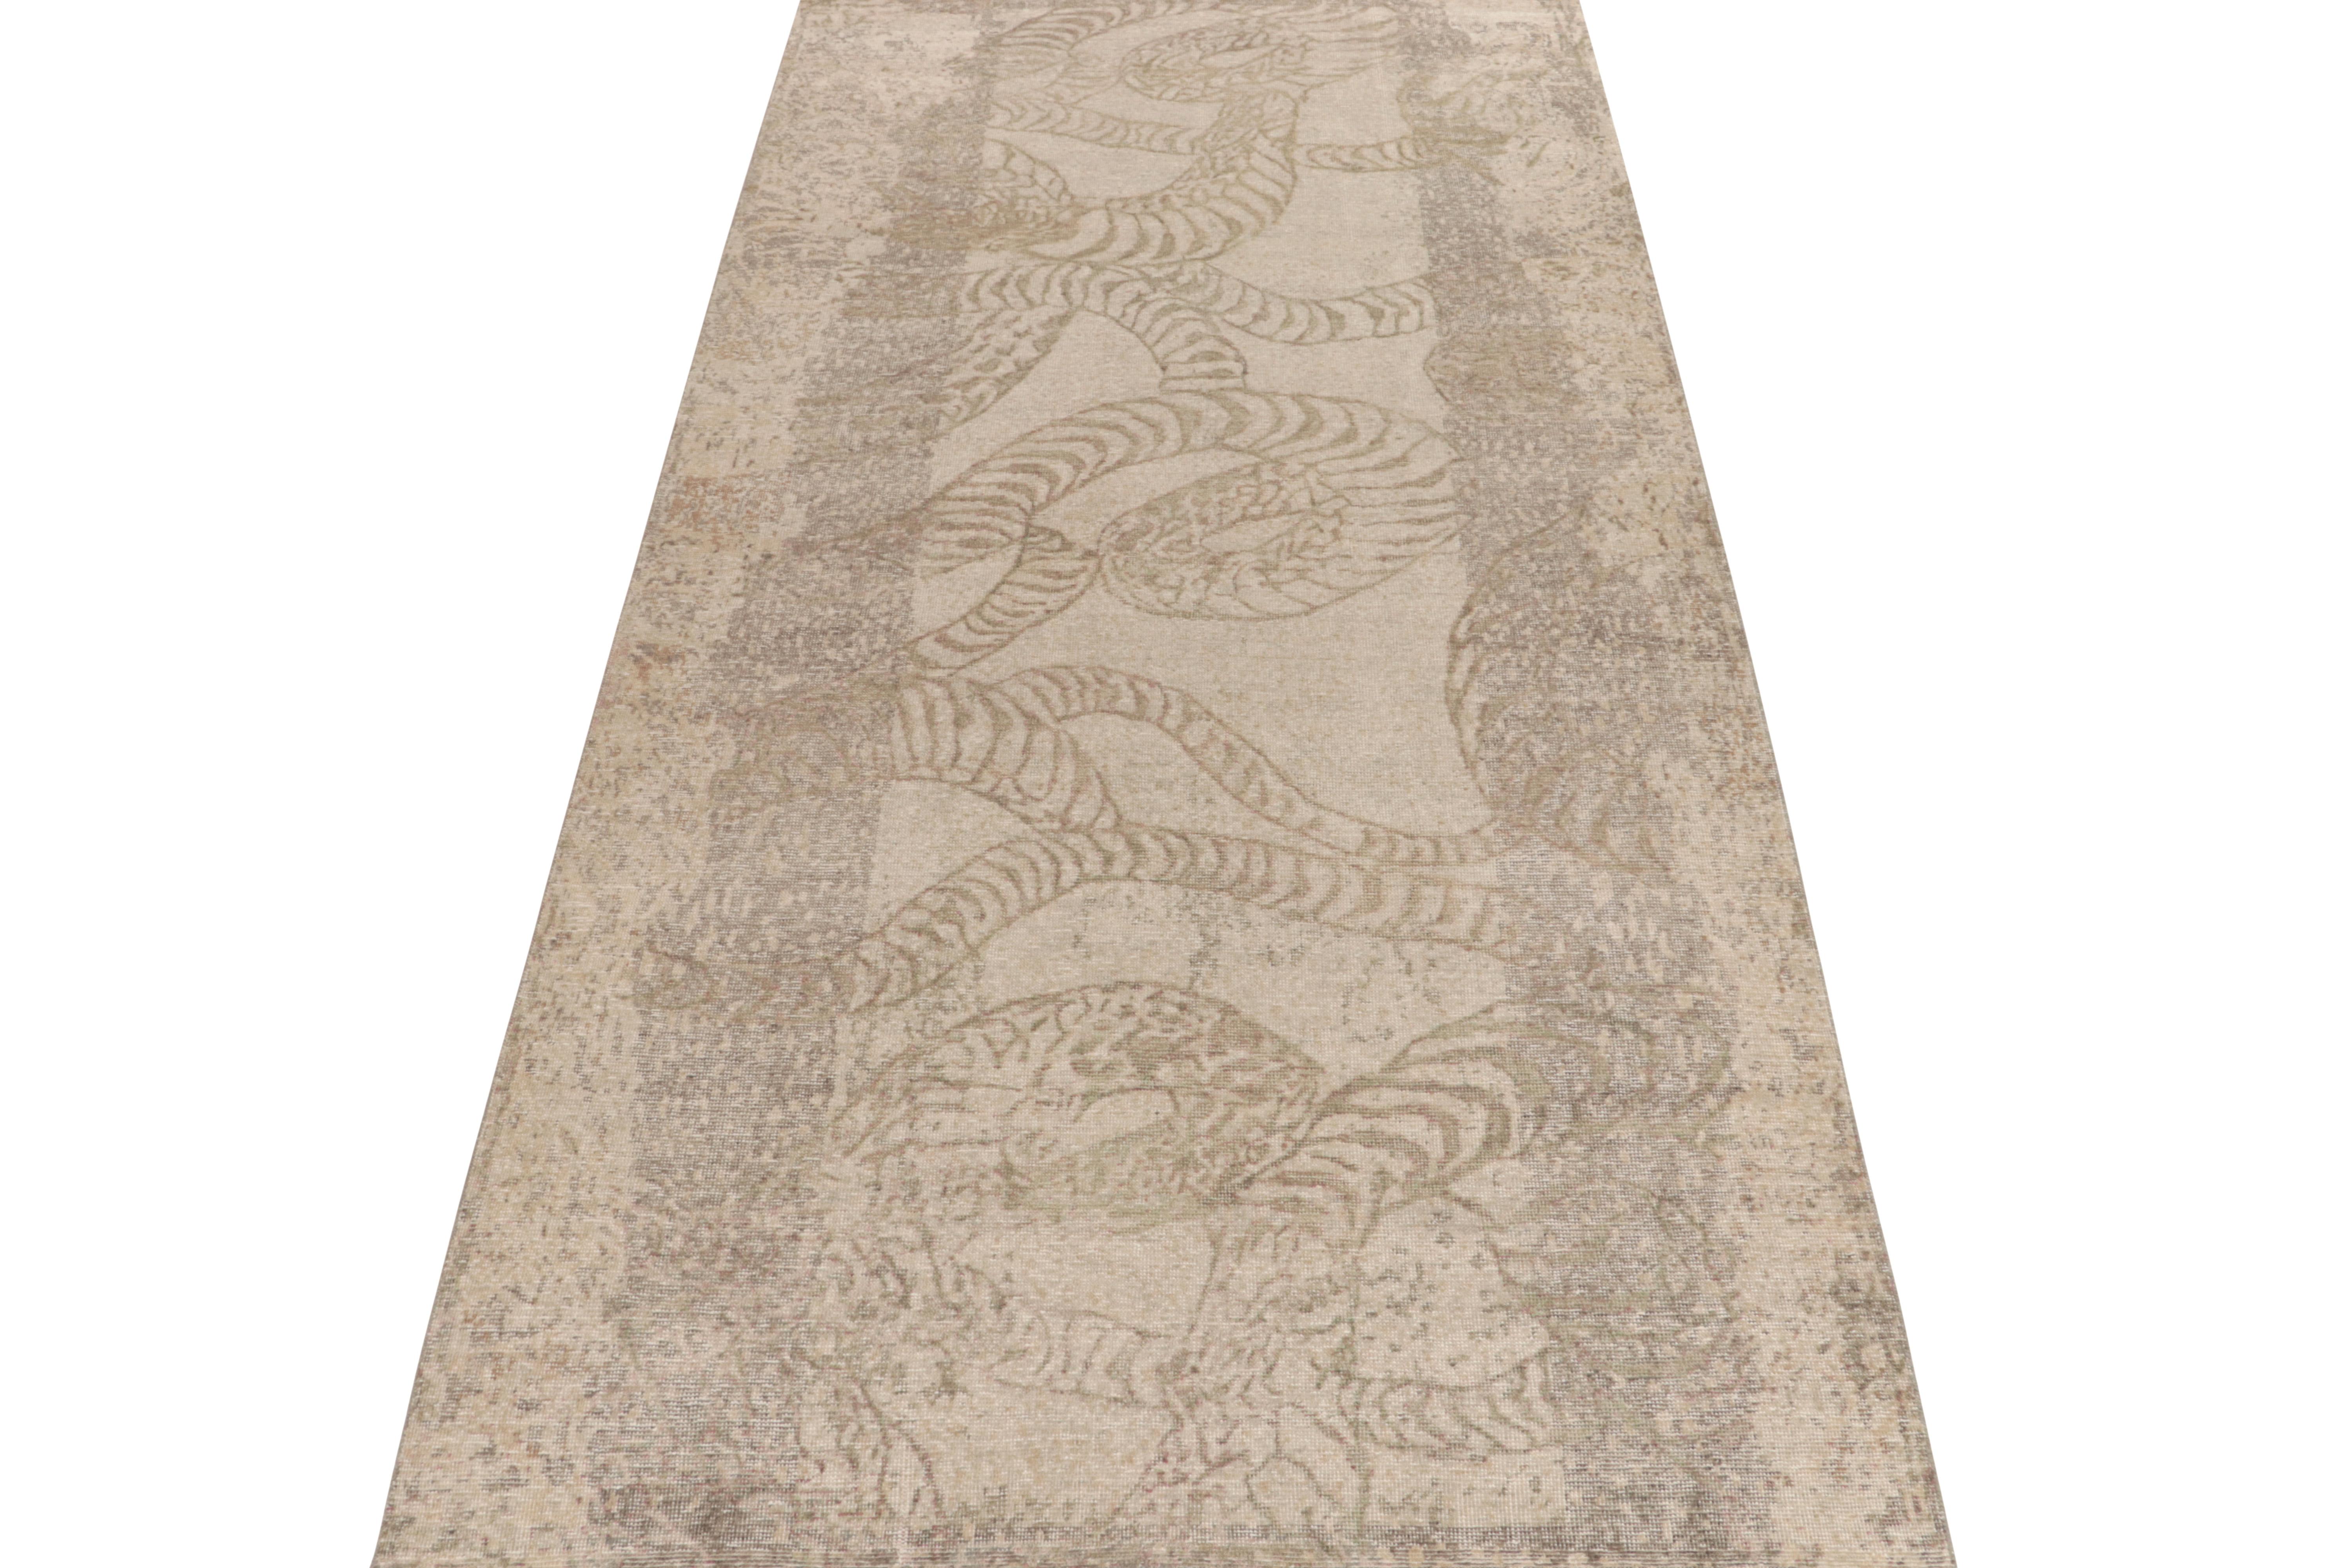 From Rug & Kilim’s Homage collection, a 6x12 distressed style abstract rug relishing a forgiving play of beige-brown and gray for a comfortable classic allure. Inspired by abstraction of animal skin rugs, the vision enjoys subtlety of color playing